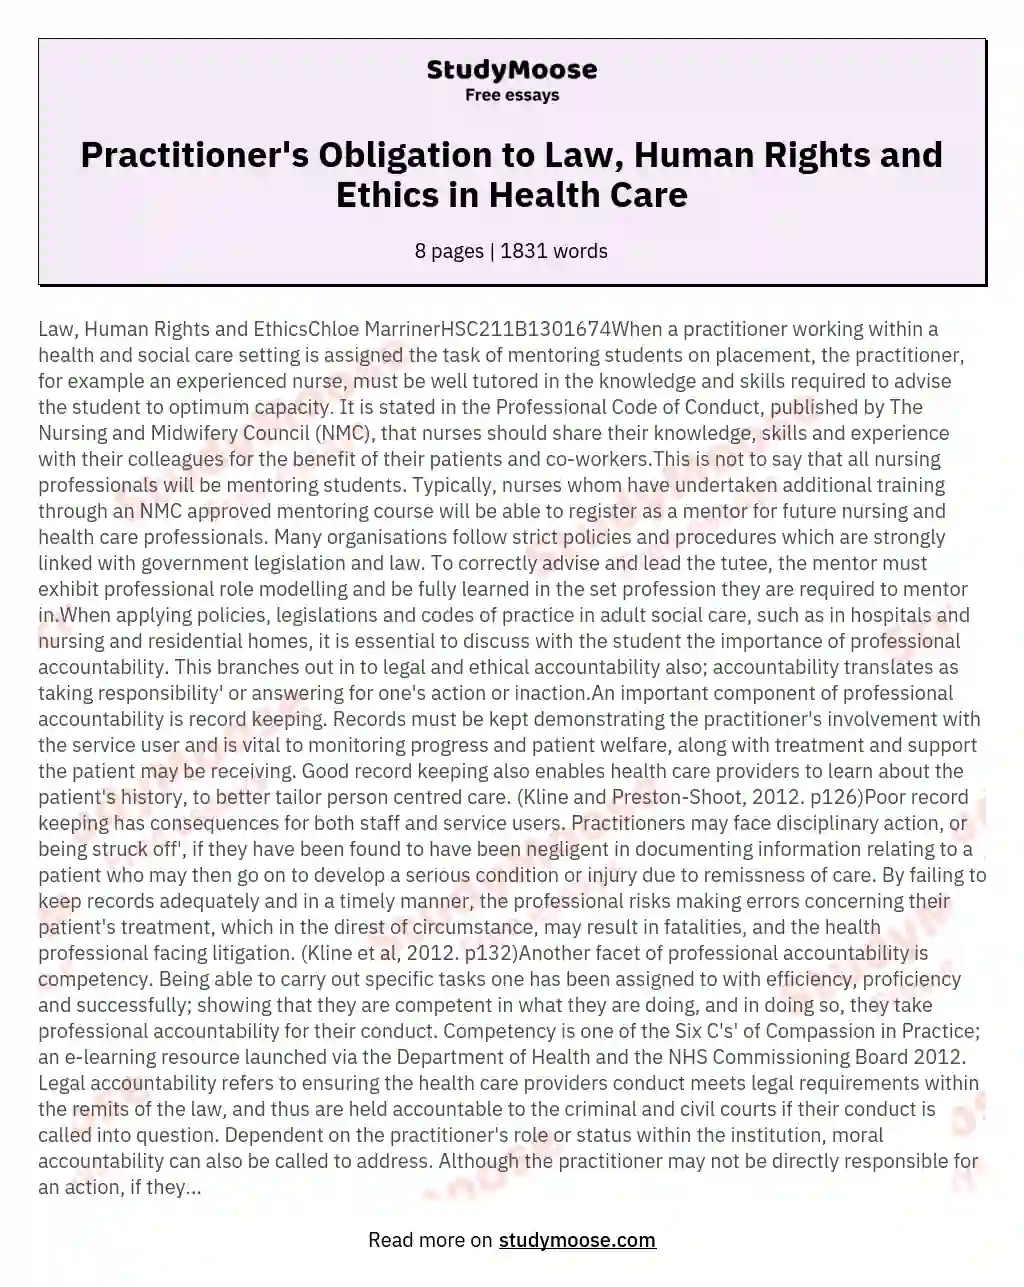 Practitioner's Obligation to Law, Human Rights and Ethics in Health Care essay